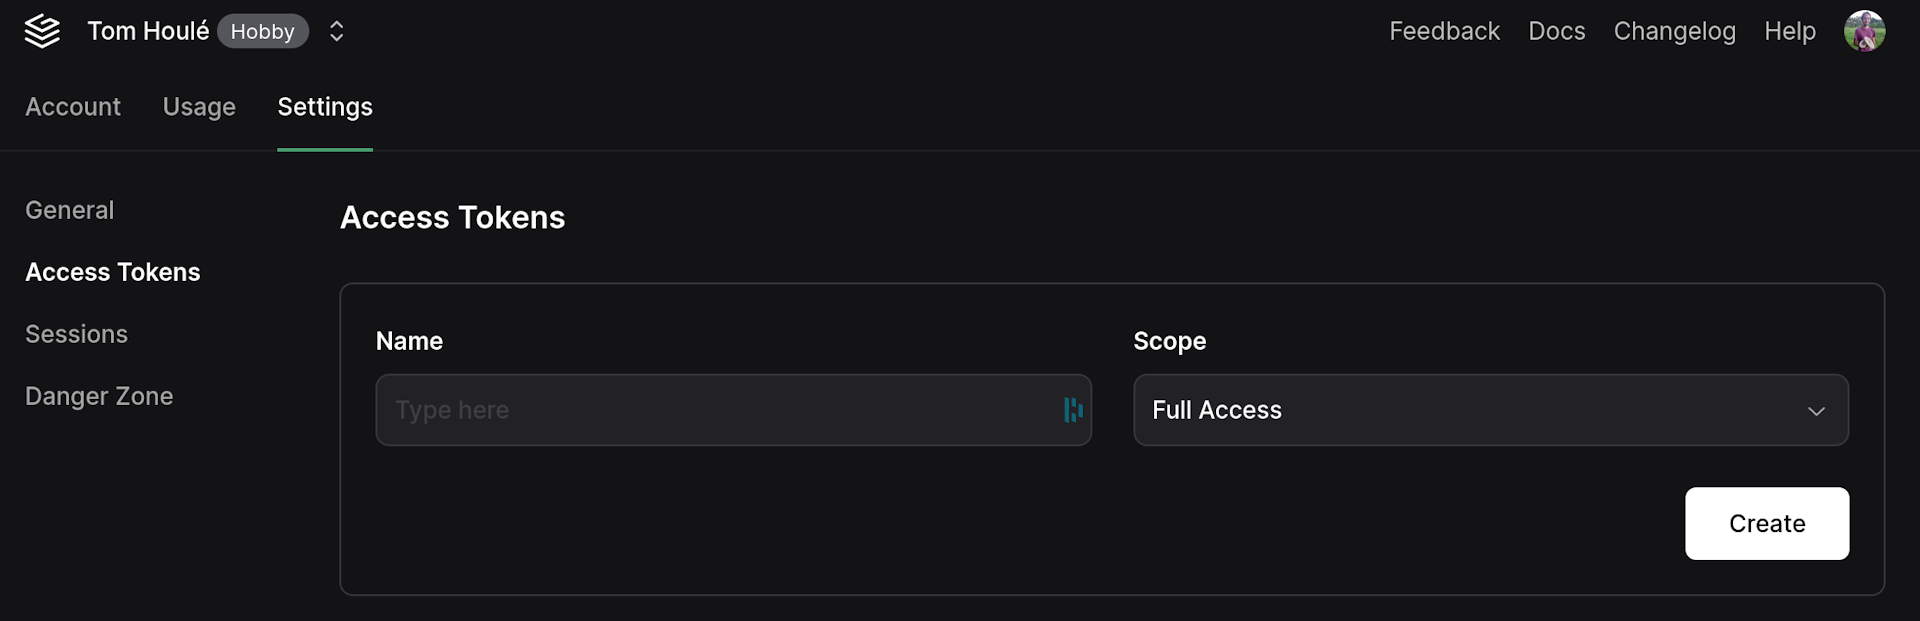 Access tokens view in the dashboard